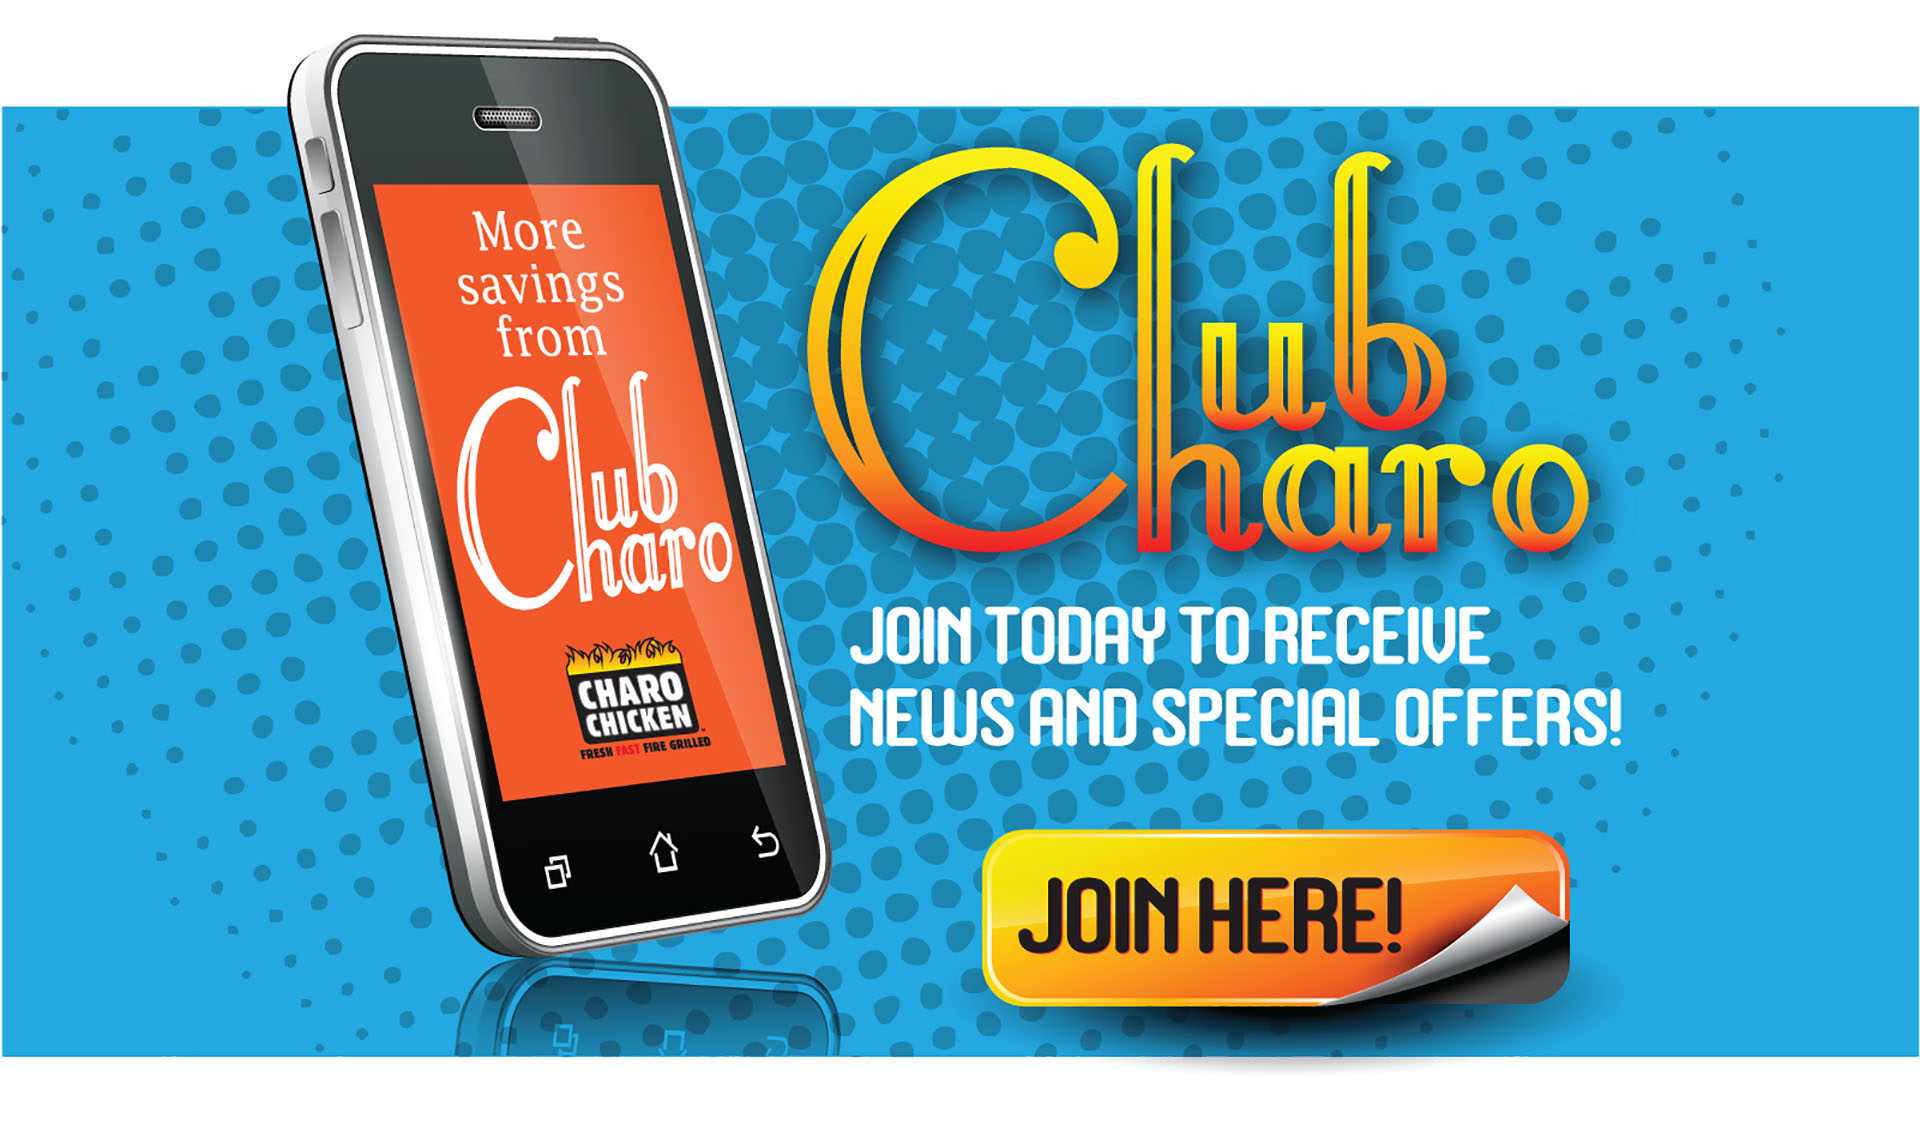 Club Charo click link "Join Here"